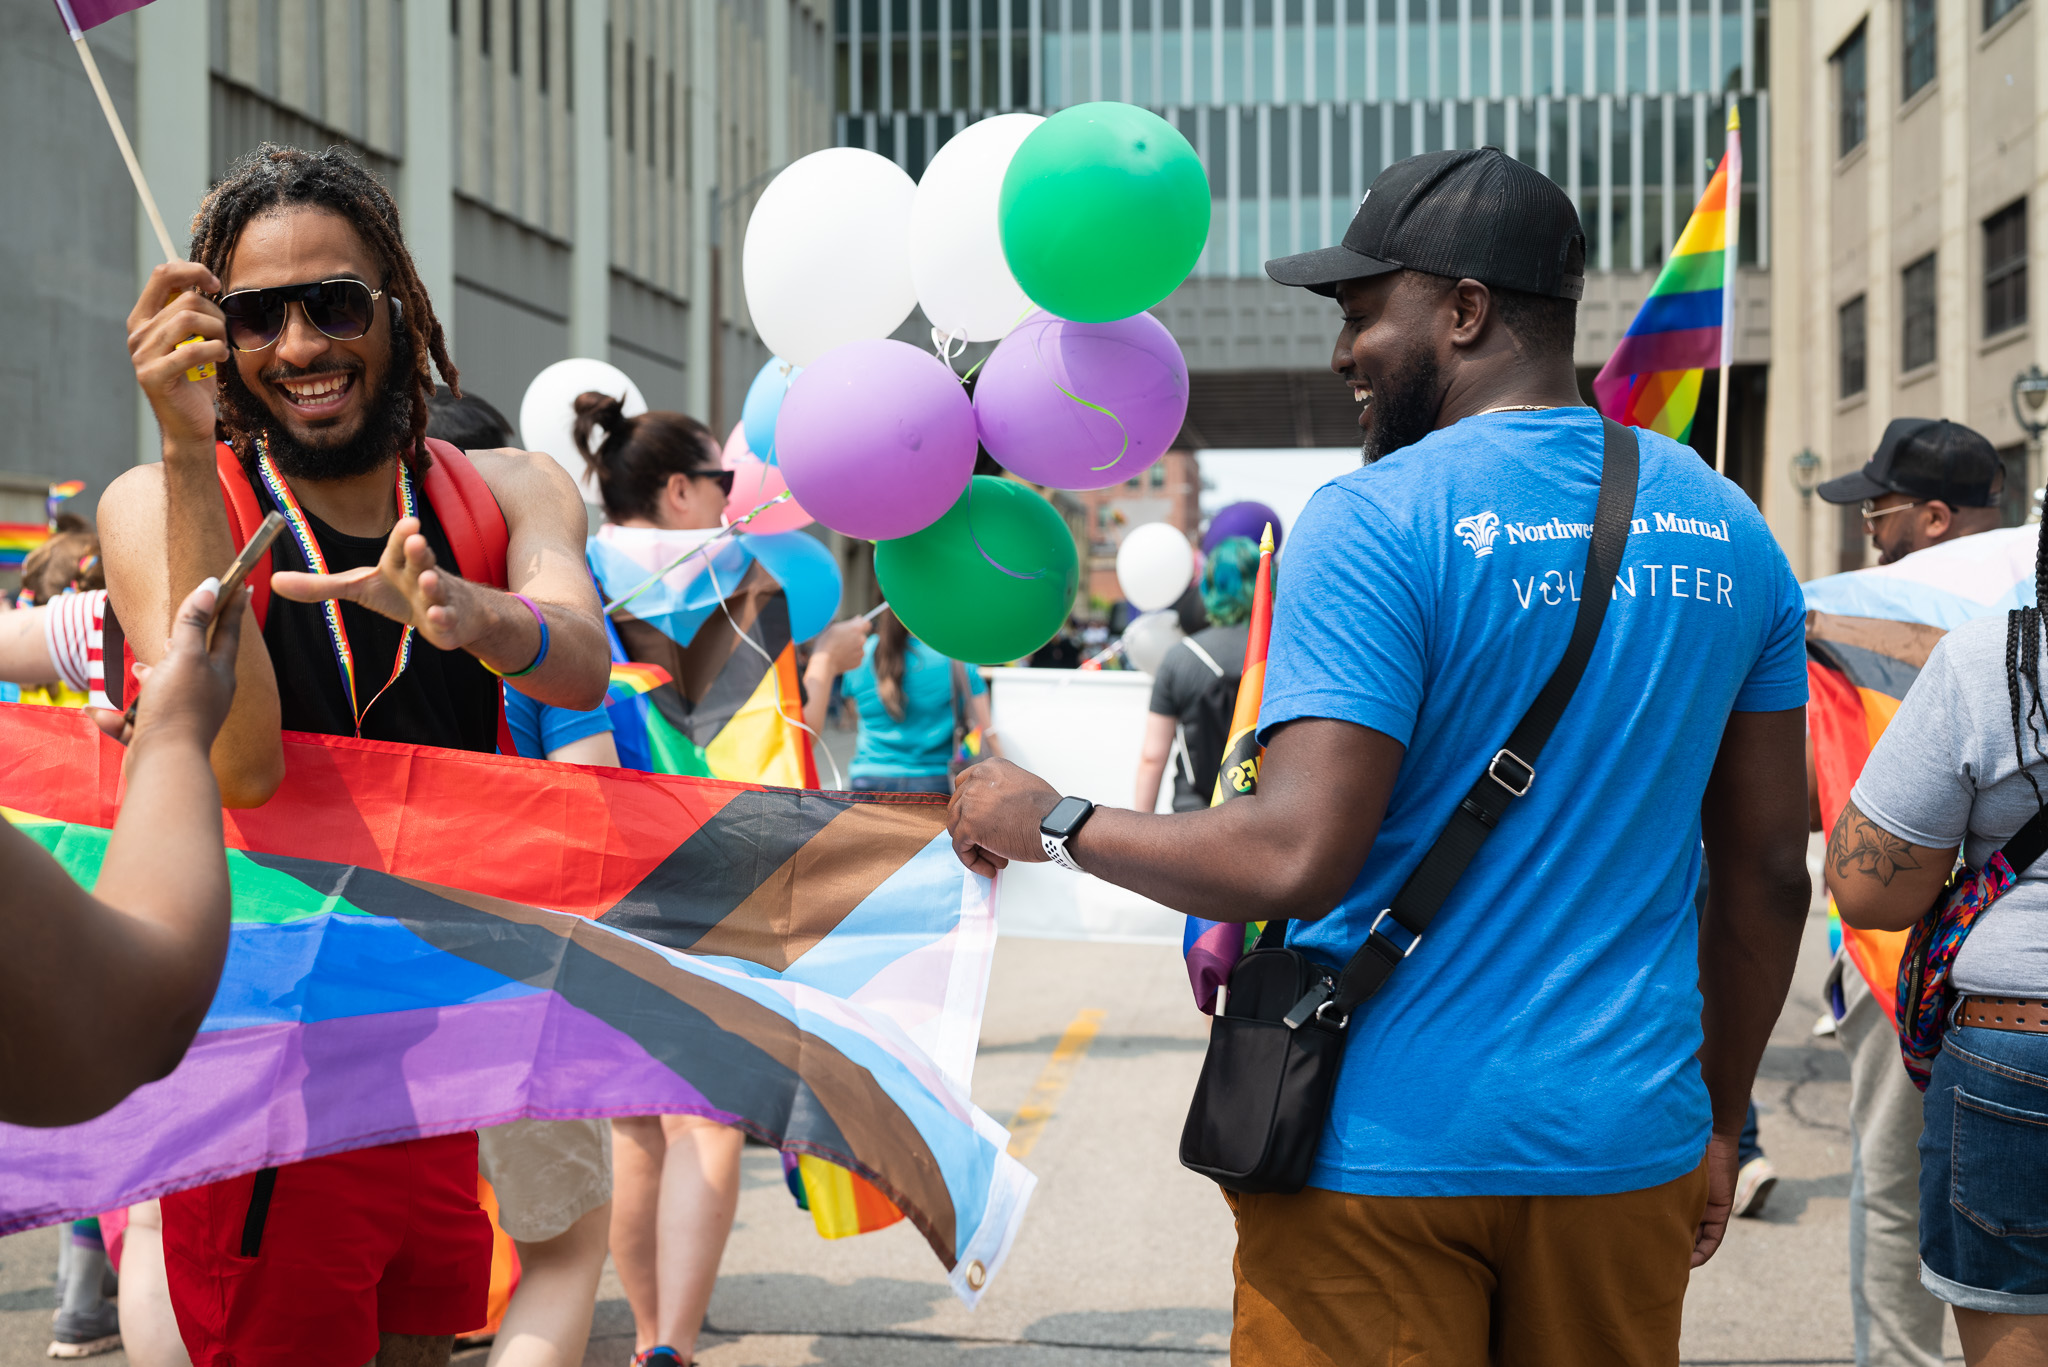 People holding rainbow flags and balloons in a parade, celebrating diversity and inclusion.